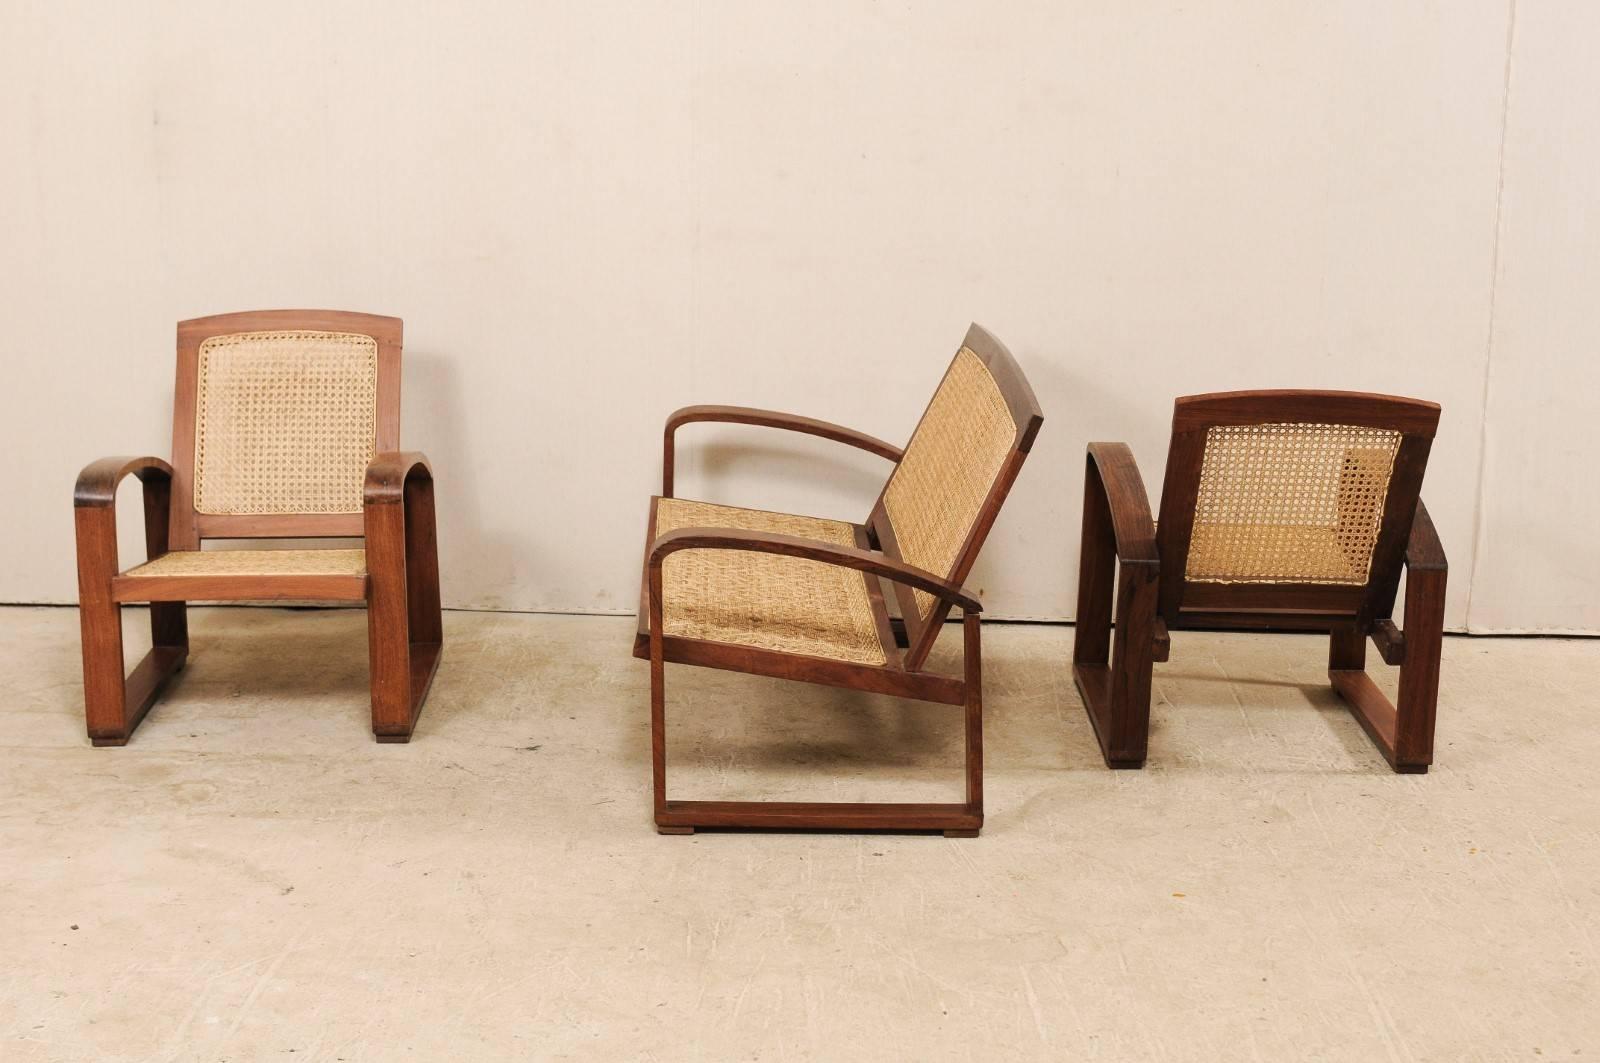 20th Century Vintage British Colonial Cane & Wood 3-Piece Seating Set with Chairs & Loveseat